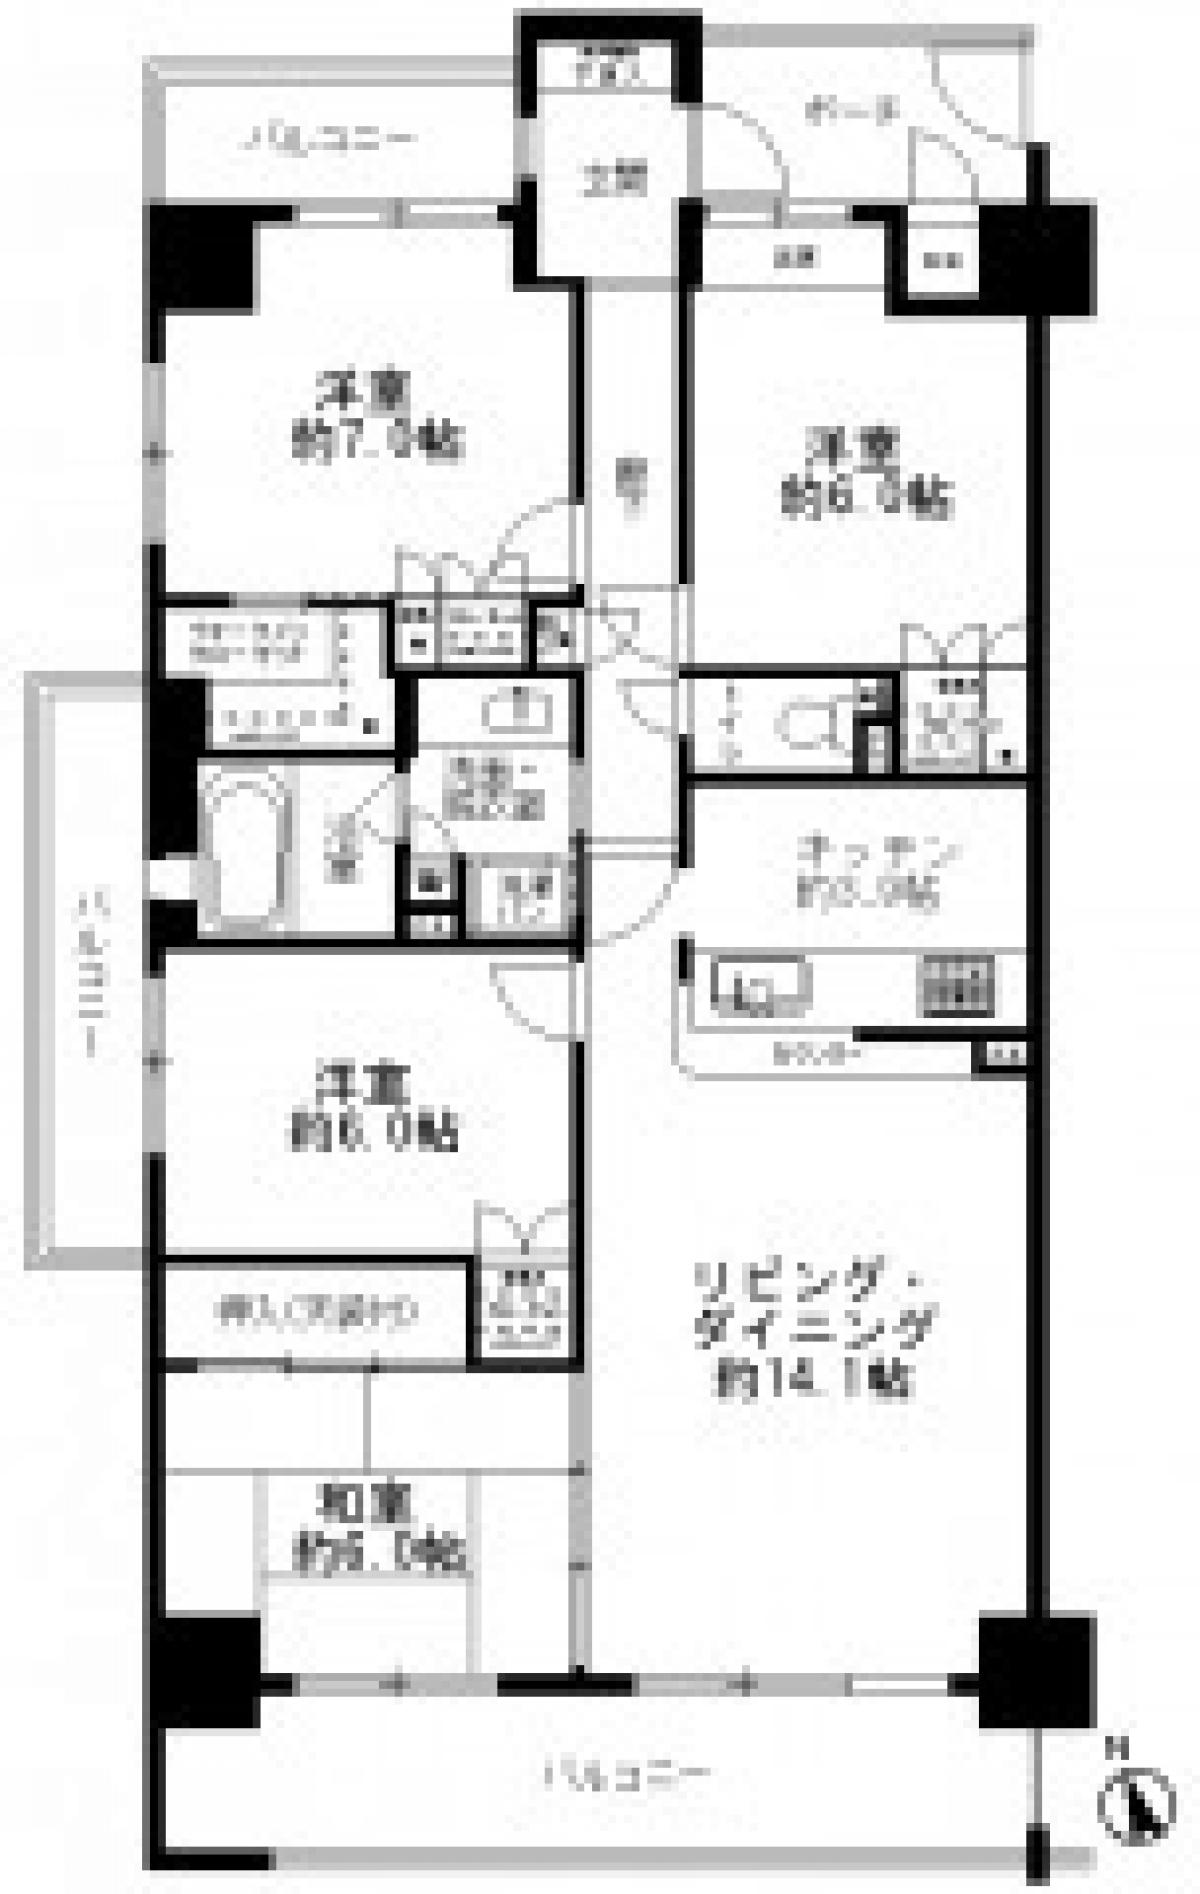 Picture of Apartment For Sale in Mihara Shi, Hiroshima, Japan